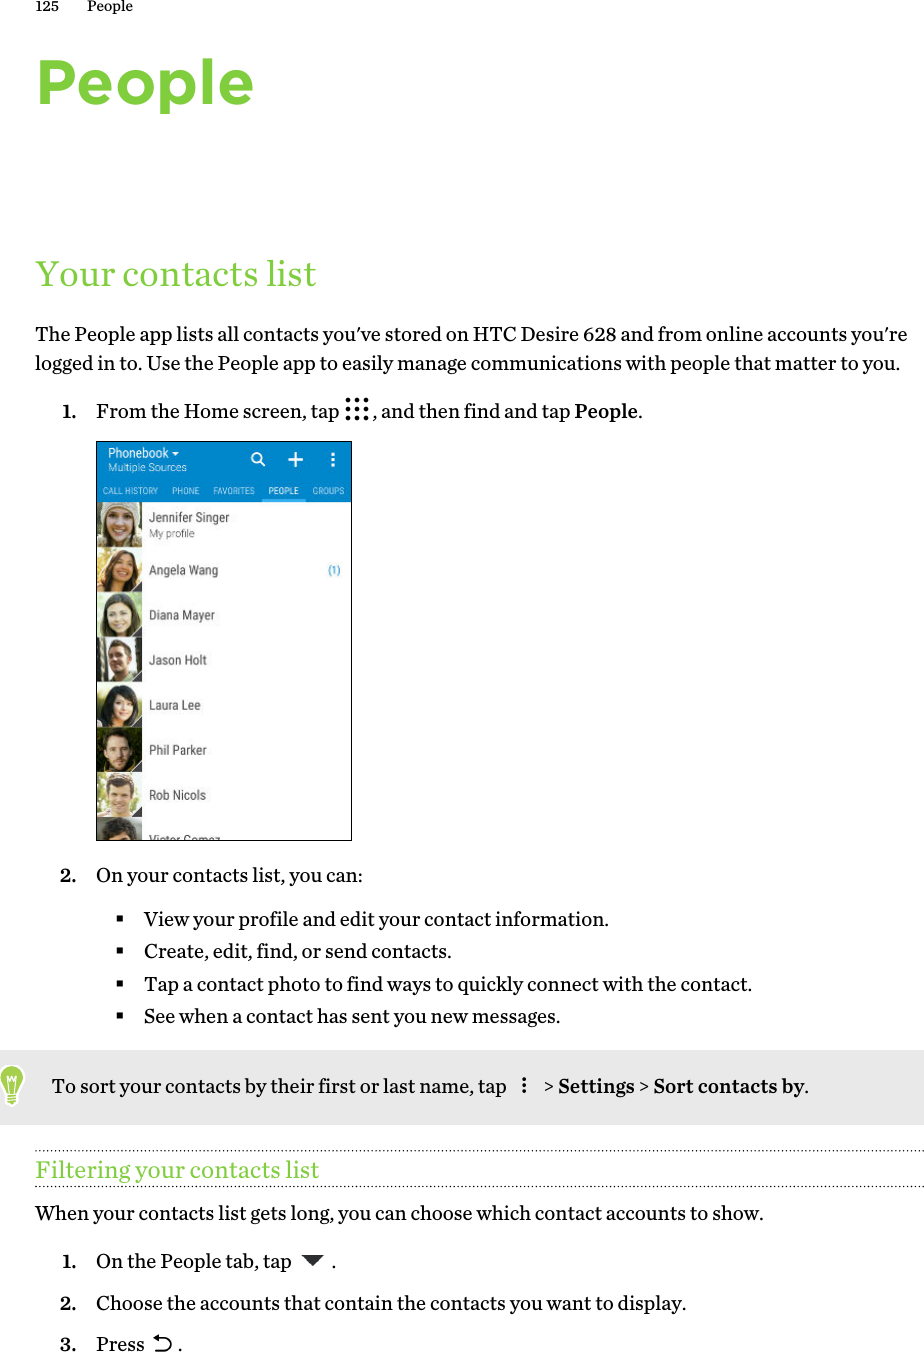 PeopleYour contacts listThe People app lists all contacts you&apos;ve stored on HTC Desire 628 and from online accounts you&apos;relogged in to. Use the People app to easily manage communications with people that matter to you.1. From the Home screen, tap  , and then find and tap People. 2. On your contacts list, you can:§View your profile and edit your contact information.§Create, edit, find, or send contacts.§Tap a contact photo to find ways to quickly connect with the contact.§See when a contact has sent you new messages.To sort your contacts by their first or last name, tap   &gt; Settings &gt; Sort contacts by.Filtering your contacts listWhen your contacts list gets long, you can choose which contact accounts to show.1. On the People tab, tap  .2. Choose the accounts that contain the contacts you want to display.3. Press  .125 People